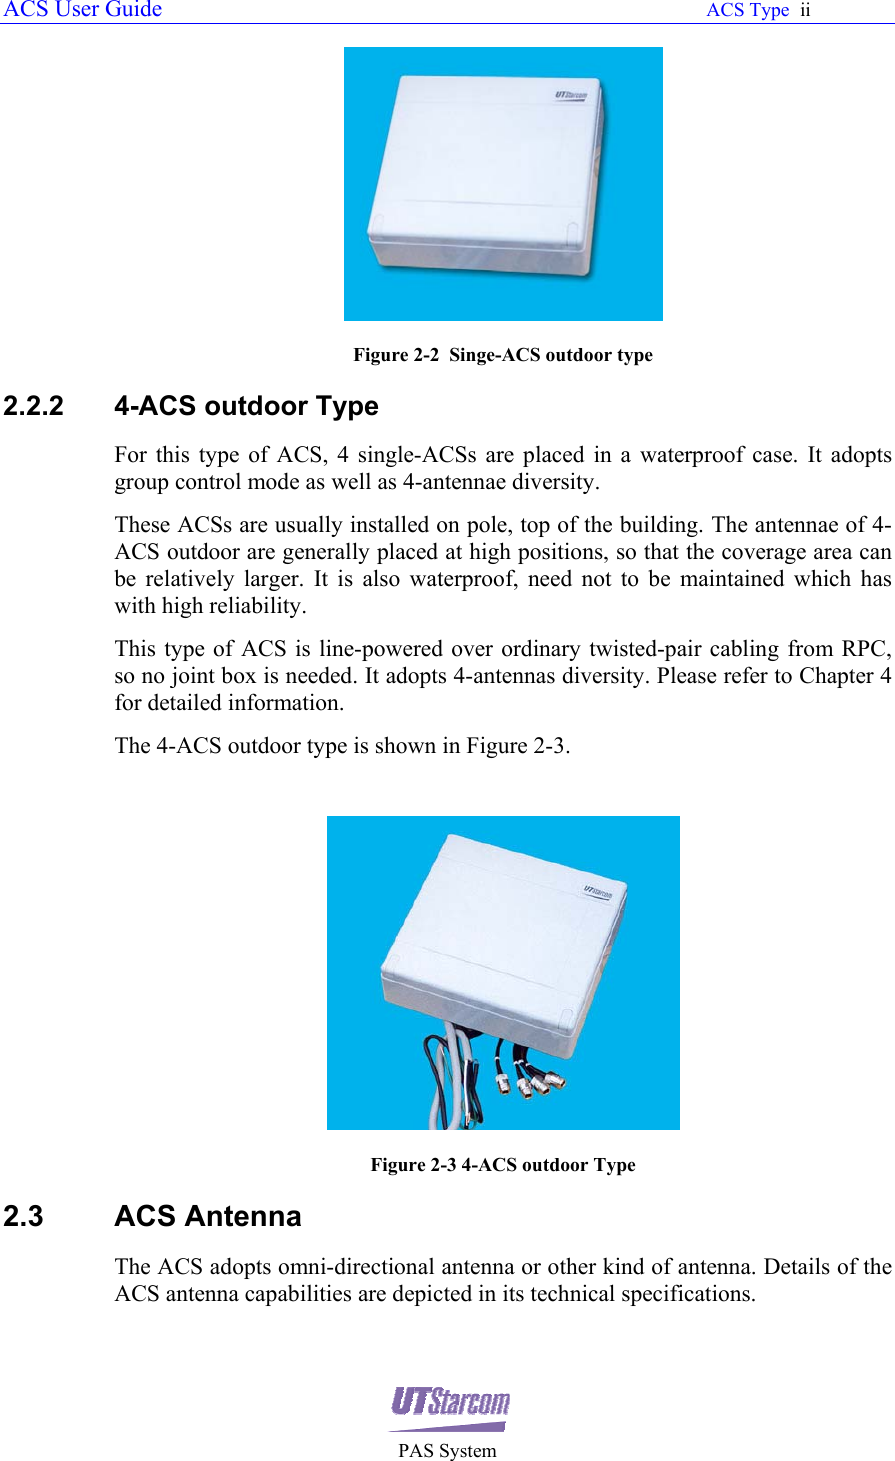 ACS User Guide                                                                                                               ACS Type  ii       PAS System  Figure 2-2  Singe-ACS outdoor type 2.2.2  4-ACS outdoor Type For this type of ACS, 4 single-ACSs are placed in a waterproof case. It adopts group control mode as well as 4-antennae diversity. These ACSs are usually installed on pole, top of the building. The antennae of 4-ACS outdoor are generally placed at high positions, so that the coverage area can be relatively larger. It is also waterproof, need not to be maintained which has with high reliability.  This type of ACS is line-powered over ordinary twisted-pair cabling from RPC, so no joint box is needed. It adopts 4-antennas diversity. Please refer to Chapter 4 for detailed information. The 4-ACS outdoor type is shown in Figure 2-3.   Figure 2-3 4-ACS outdoor Type 2.3 ACS Antenna The ACS adopts omni-directional antenna or other kind of antenna. Details of the ACS antenna capabilities are depicted in its technical specifications. 